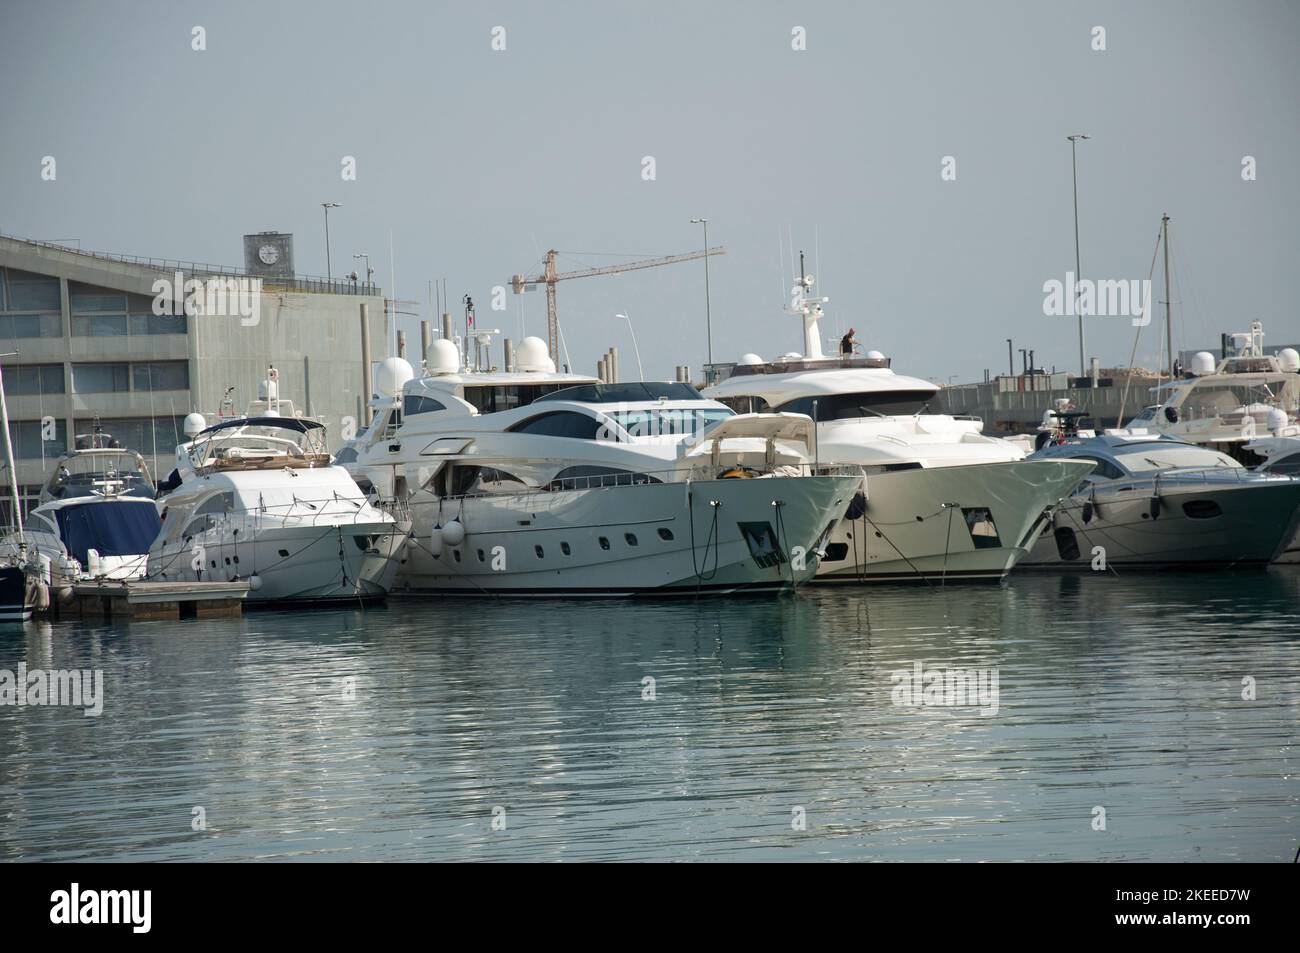 Marina, Beirut, Lebanon, Middle East, boats in harbour.  Yacht club in the background. Stock Photo